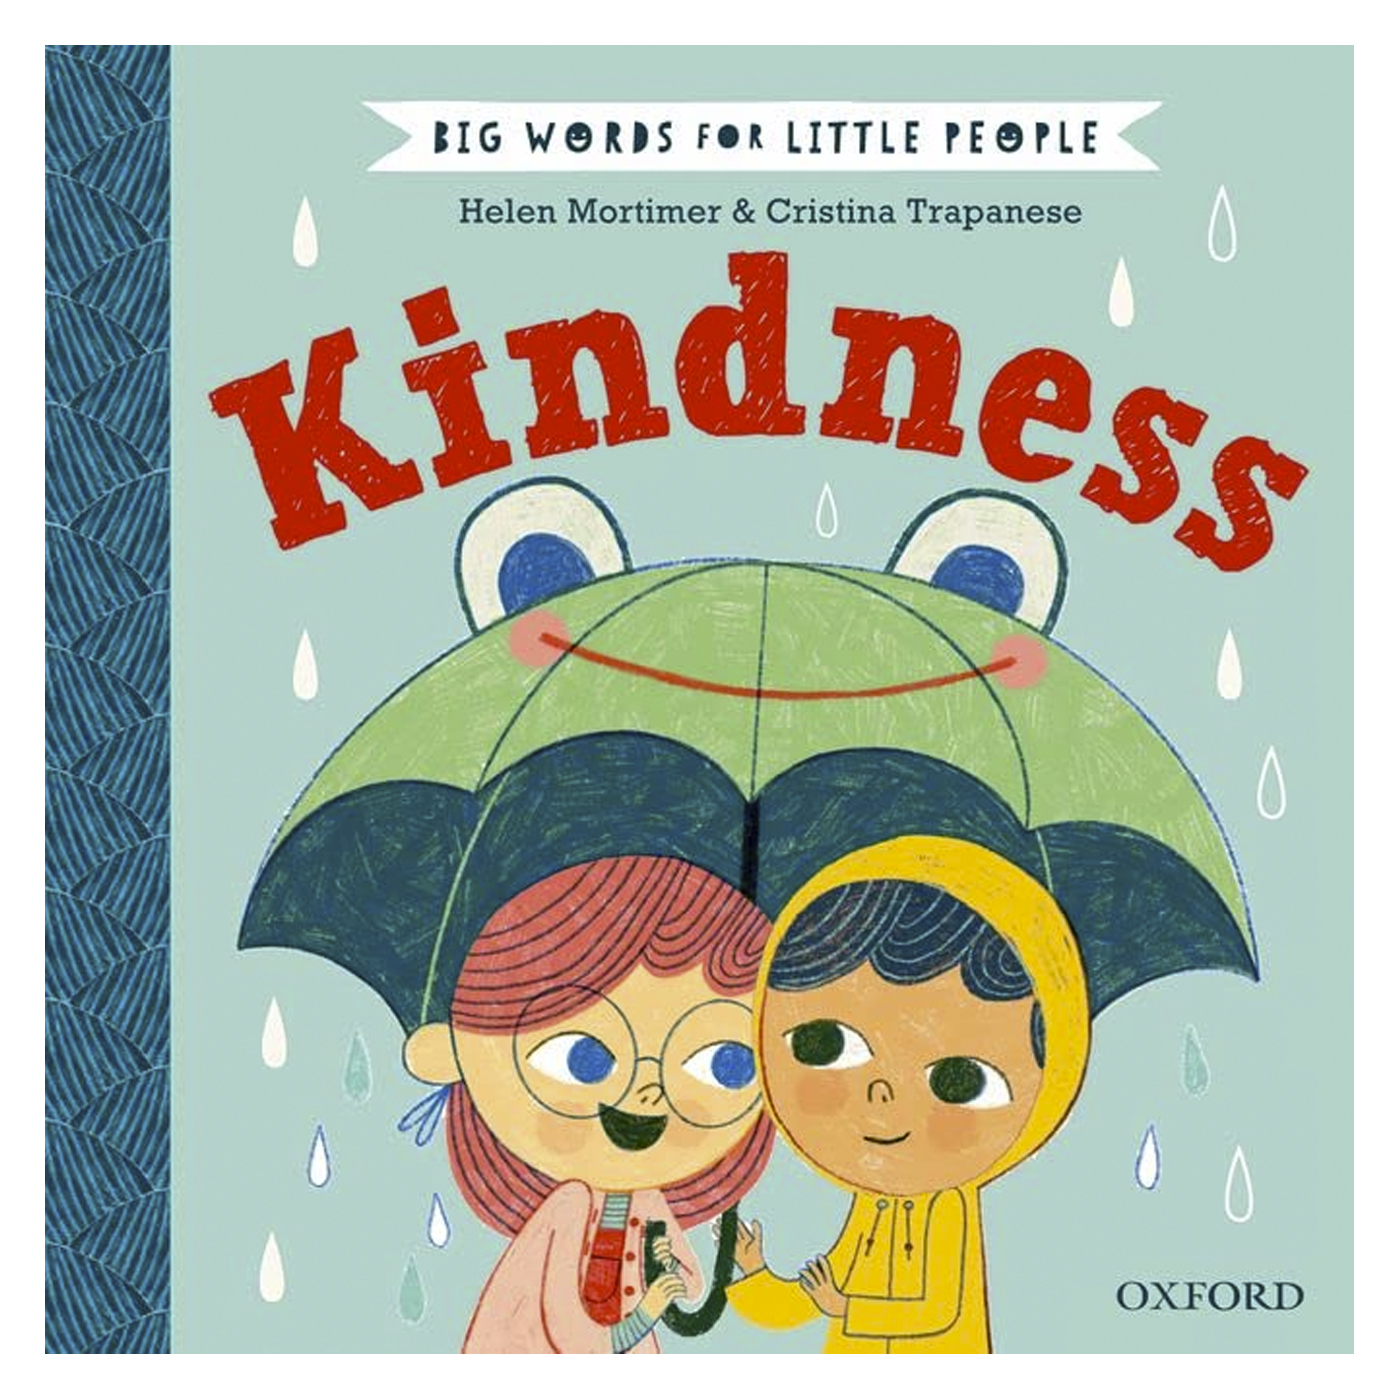 OXFORD CHILDRENS BOOK Big Words For Little People: Kindness